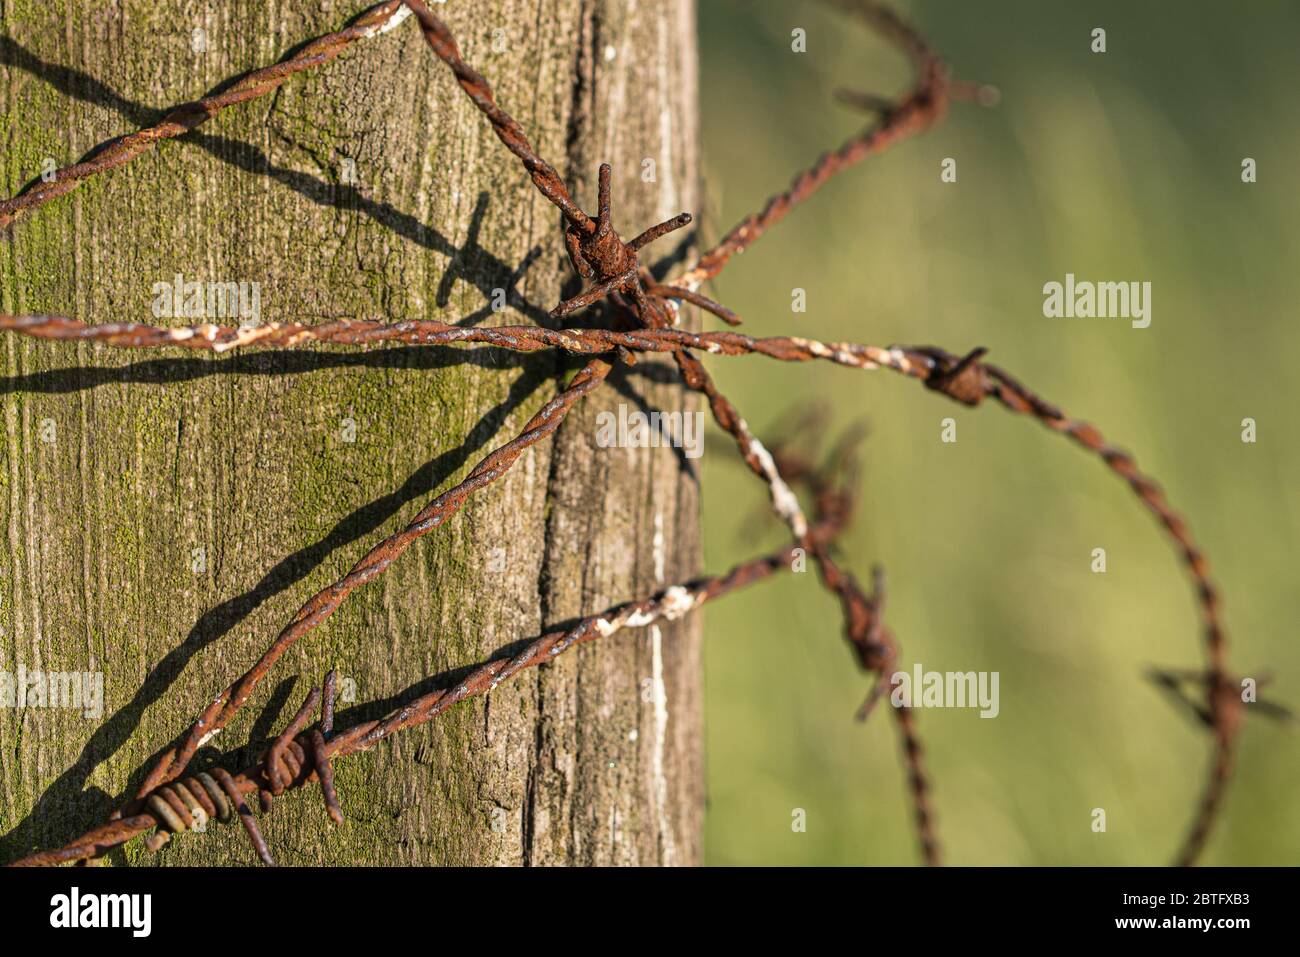 Close-up of old rusty barbed wire on a wooden pole in the sunlight. Stock Photo